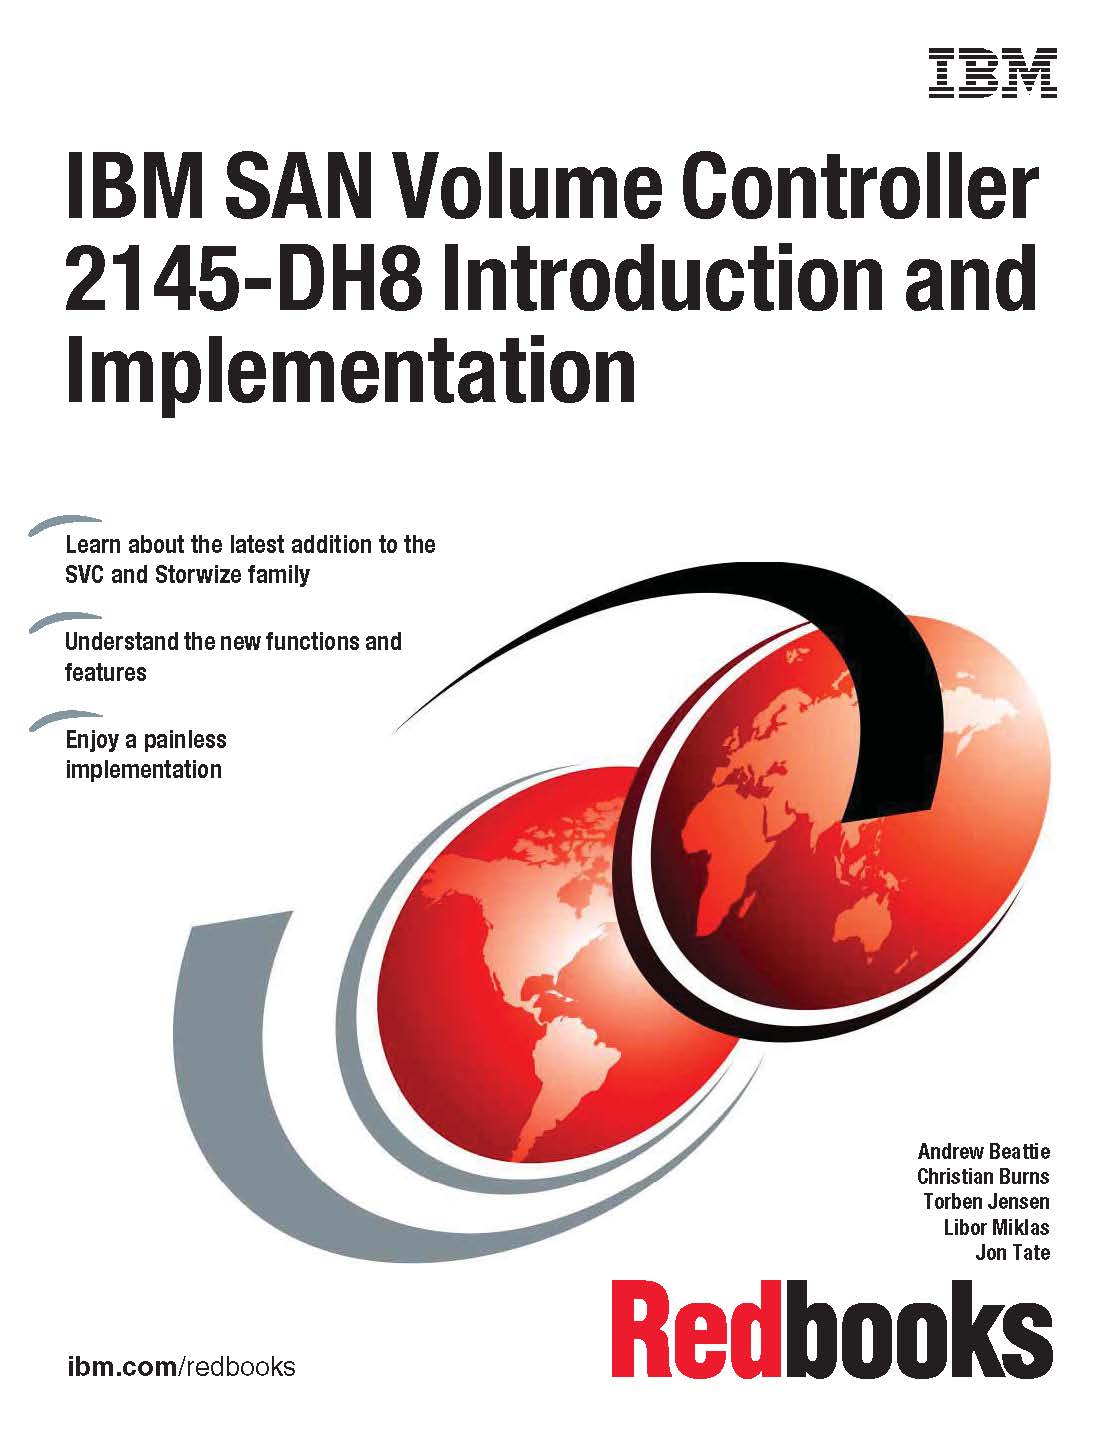 IBM SAN Volume Controller 2145-DH8 Introduction and Implementation